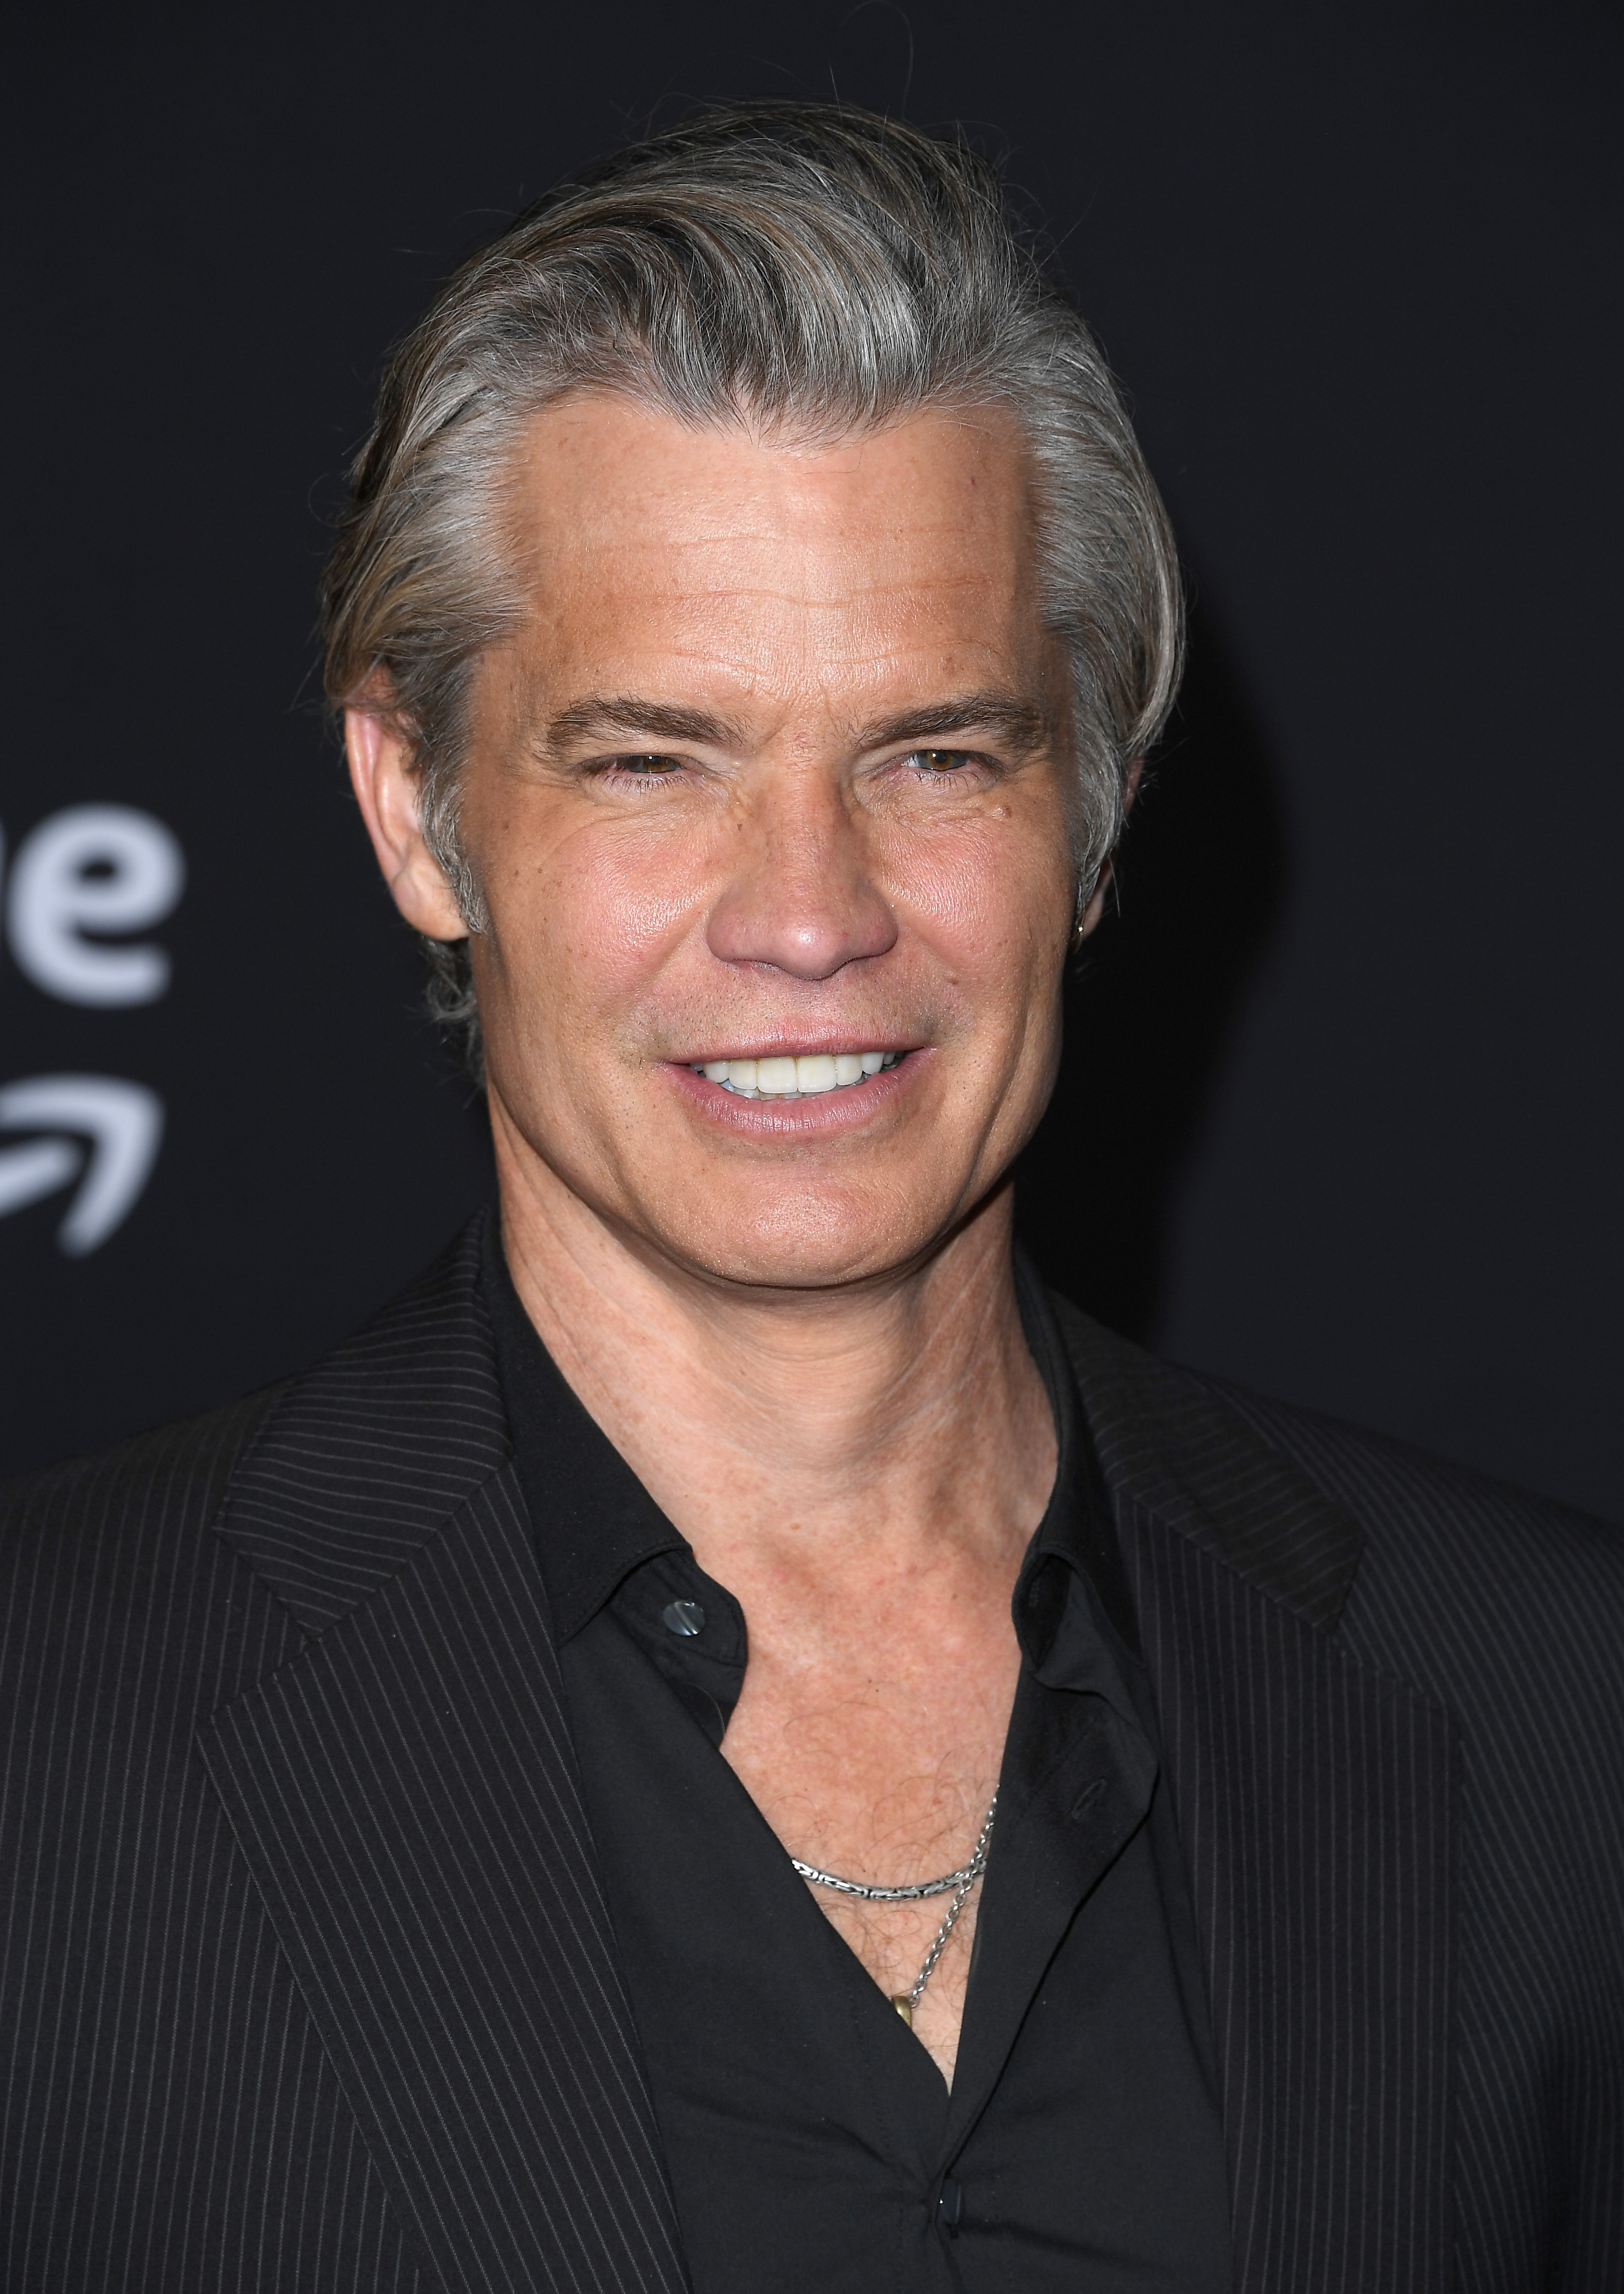 Timothy Olyphant at the Los Angeles premiere of "Daisy Jones & The Six" on February 23, 2023, in Hollywood, California. | Source: Getty Images